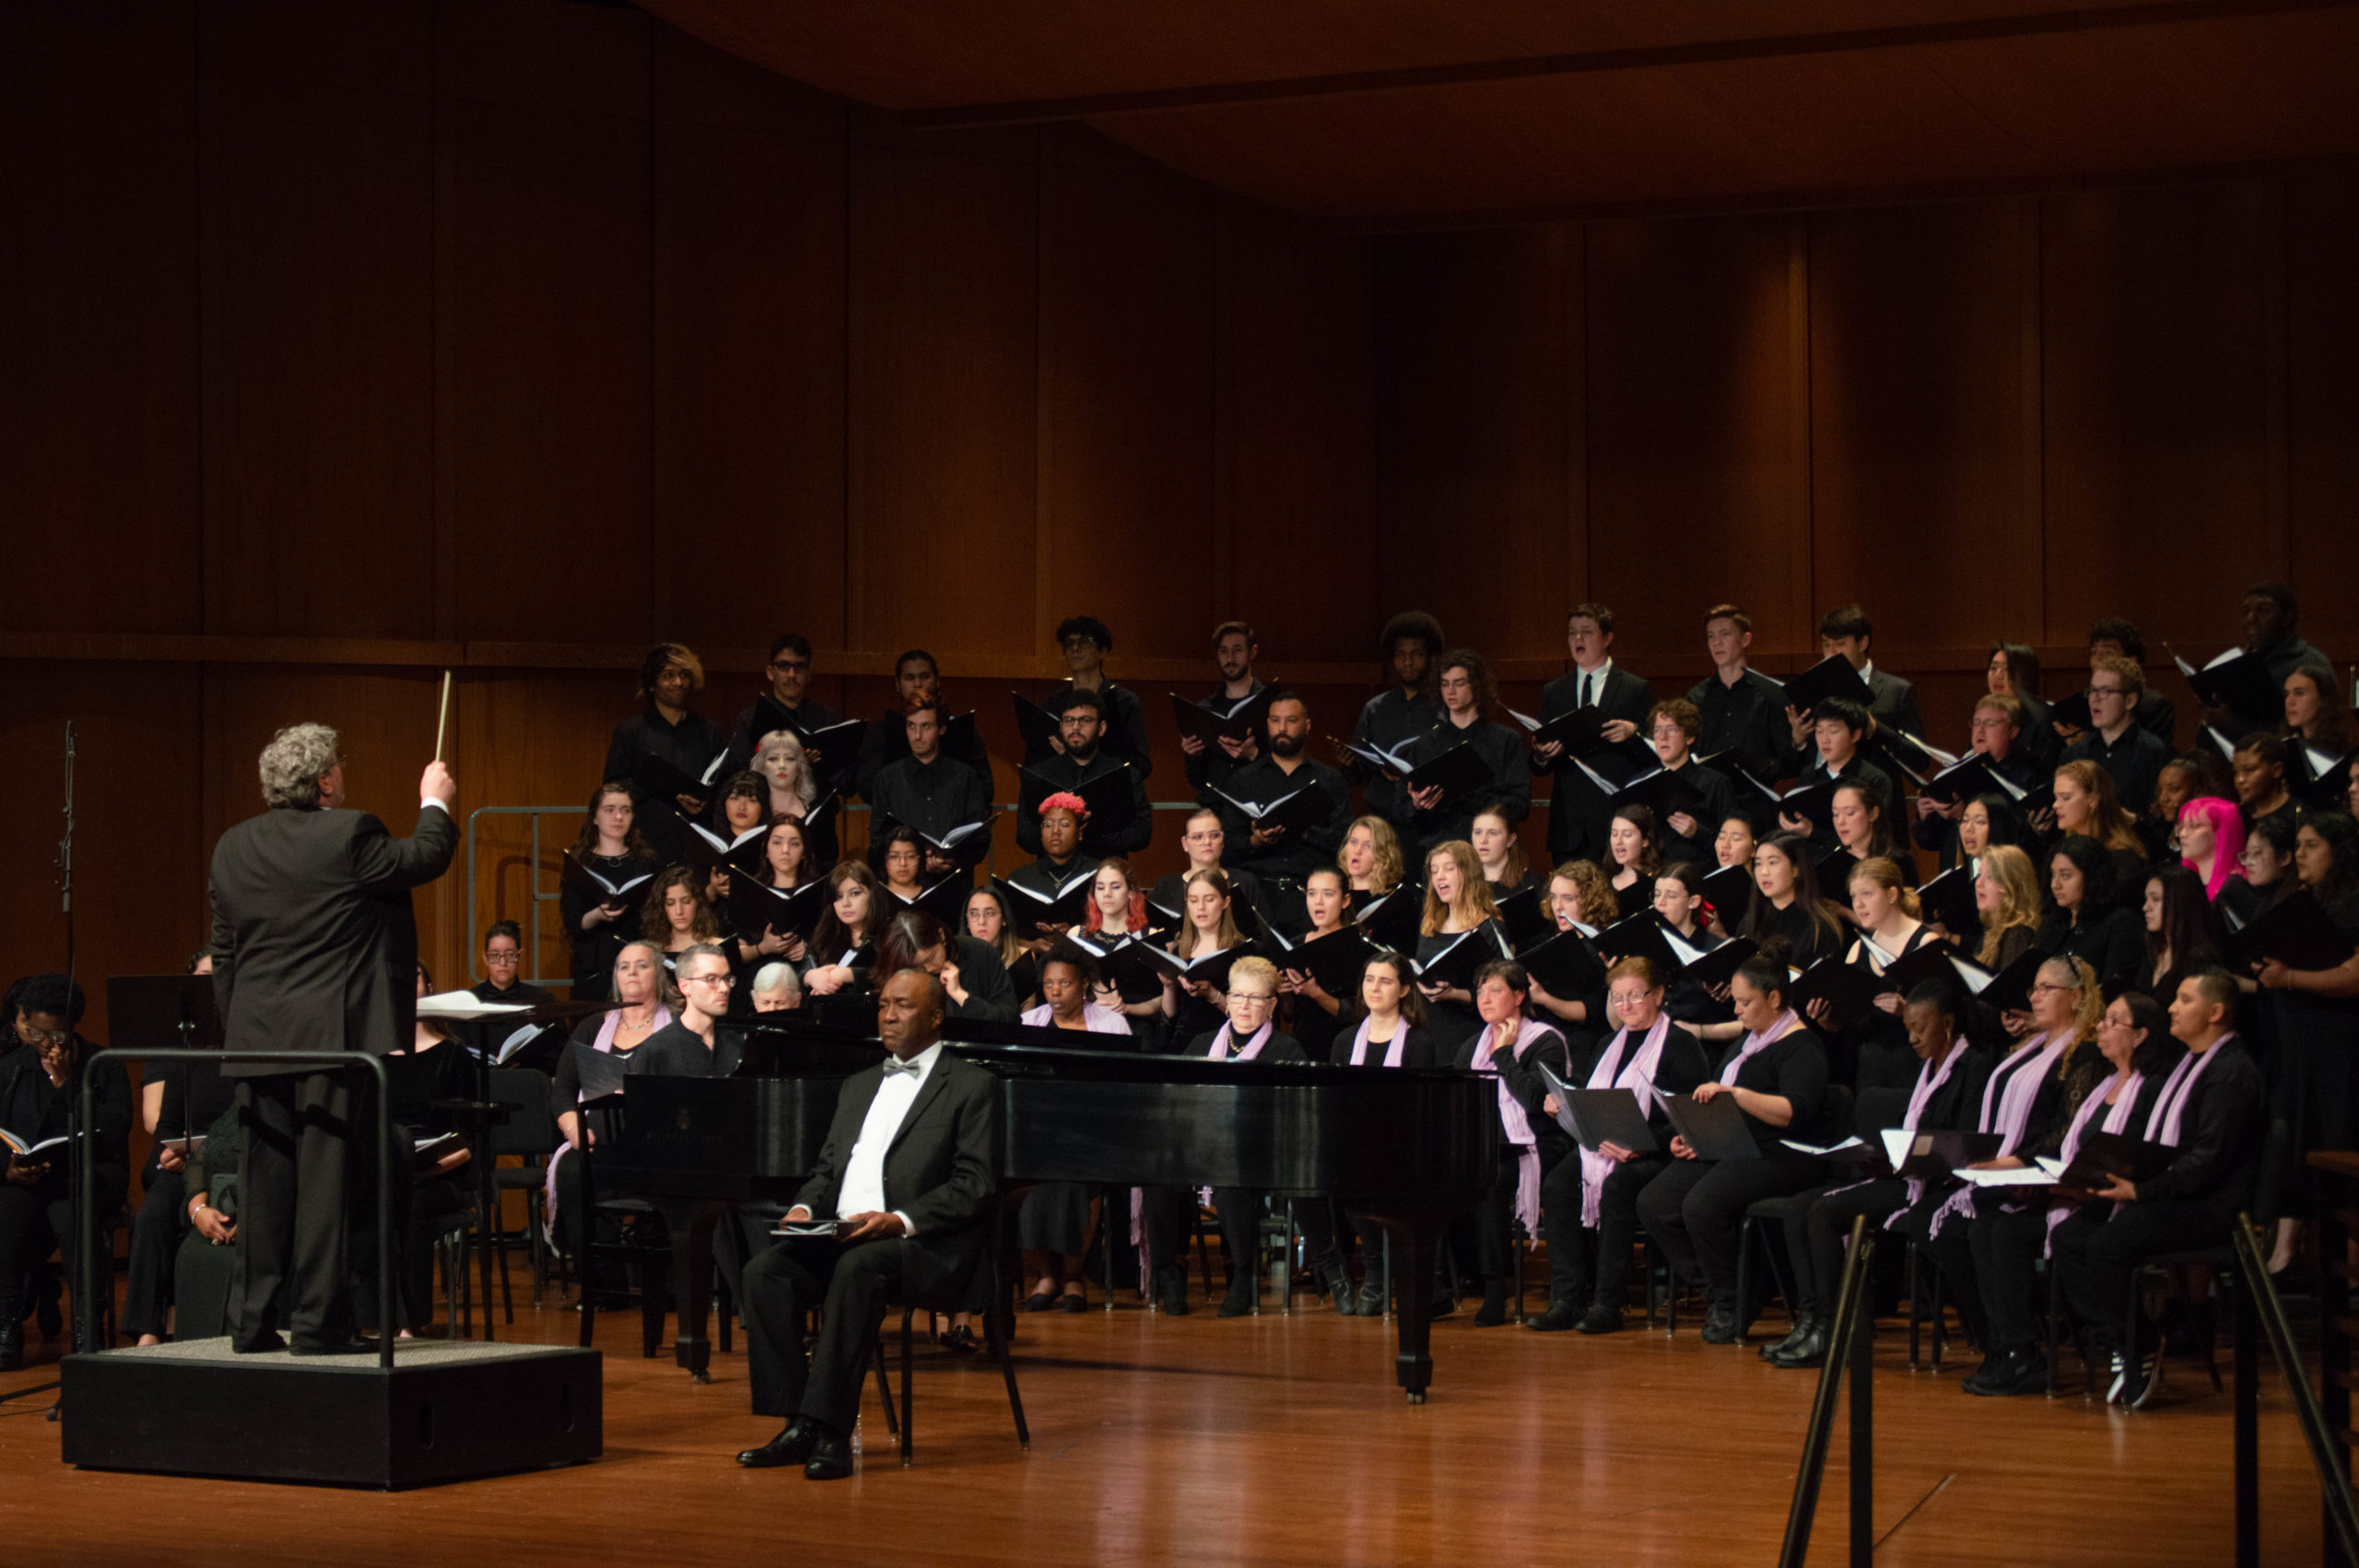 The Claremont Concert Choir and Claremont Treble Singers joined by Chaffey College Chamber Choir and the Crossroads Choir in concert February 2020.